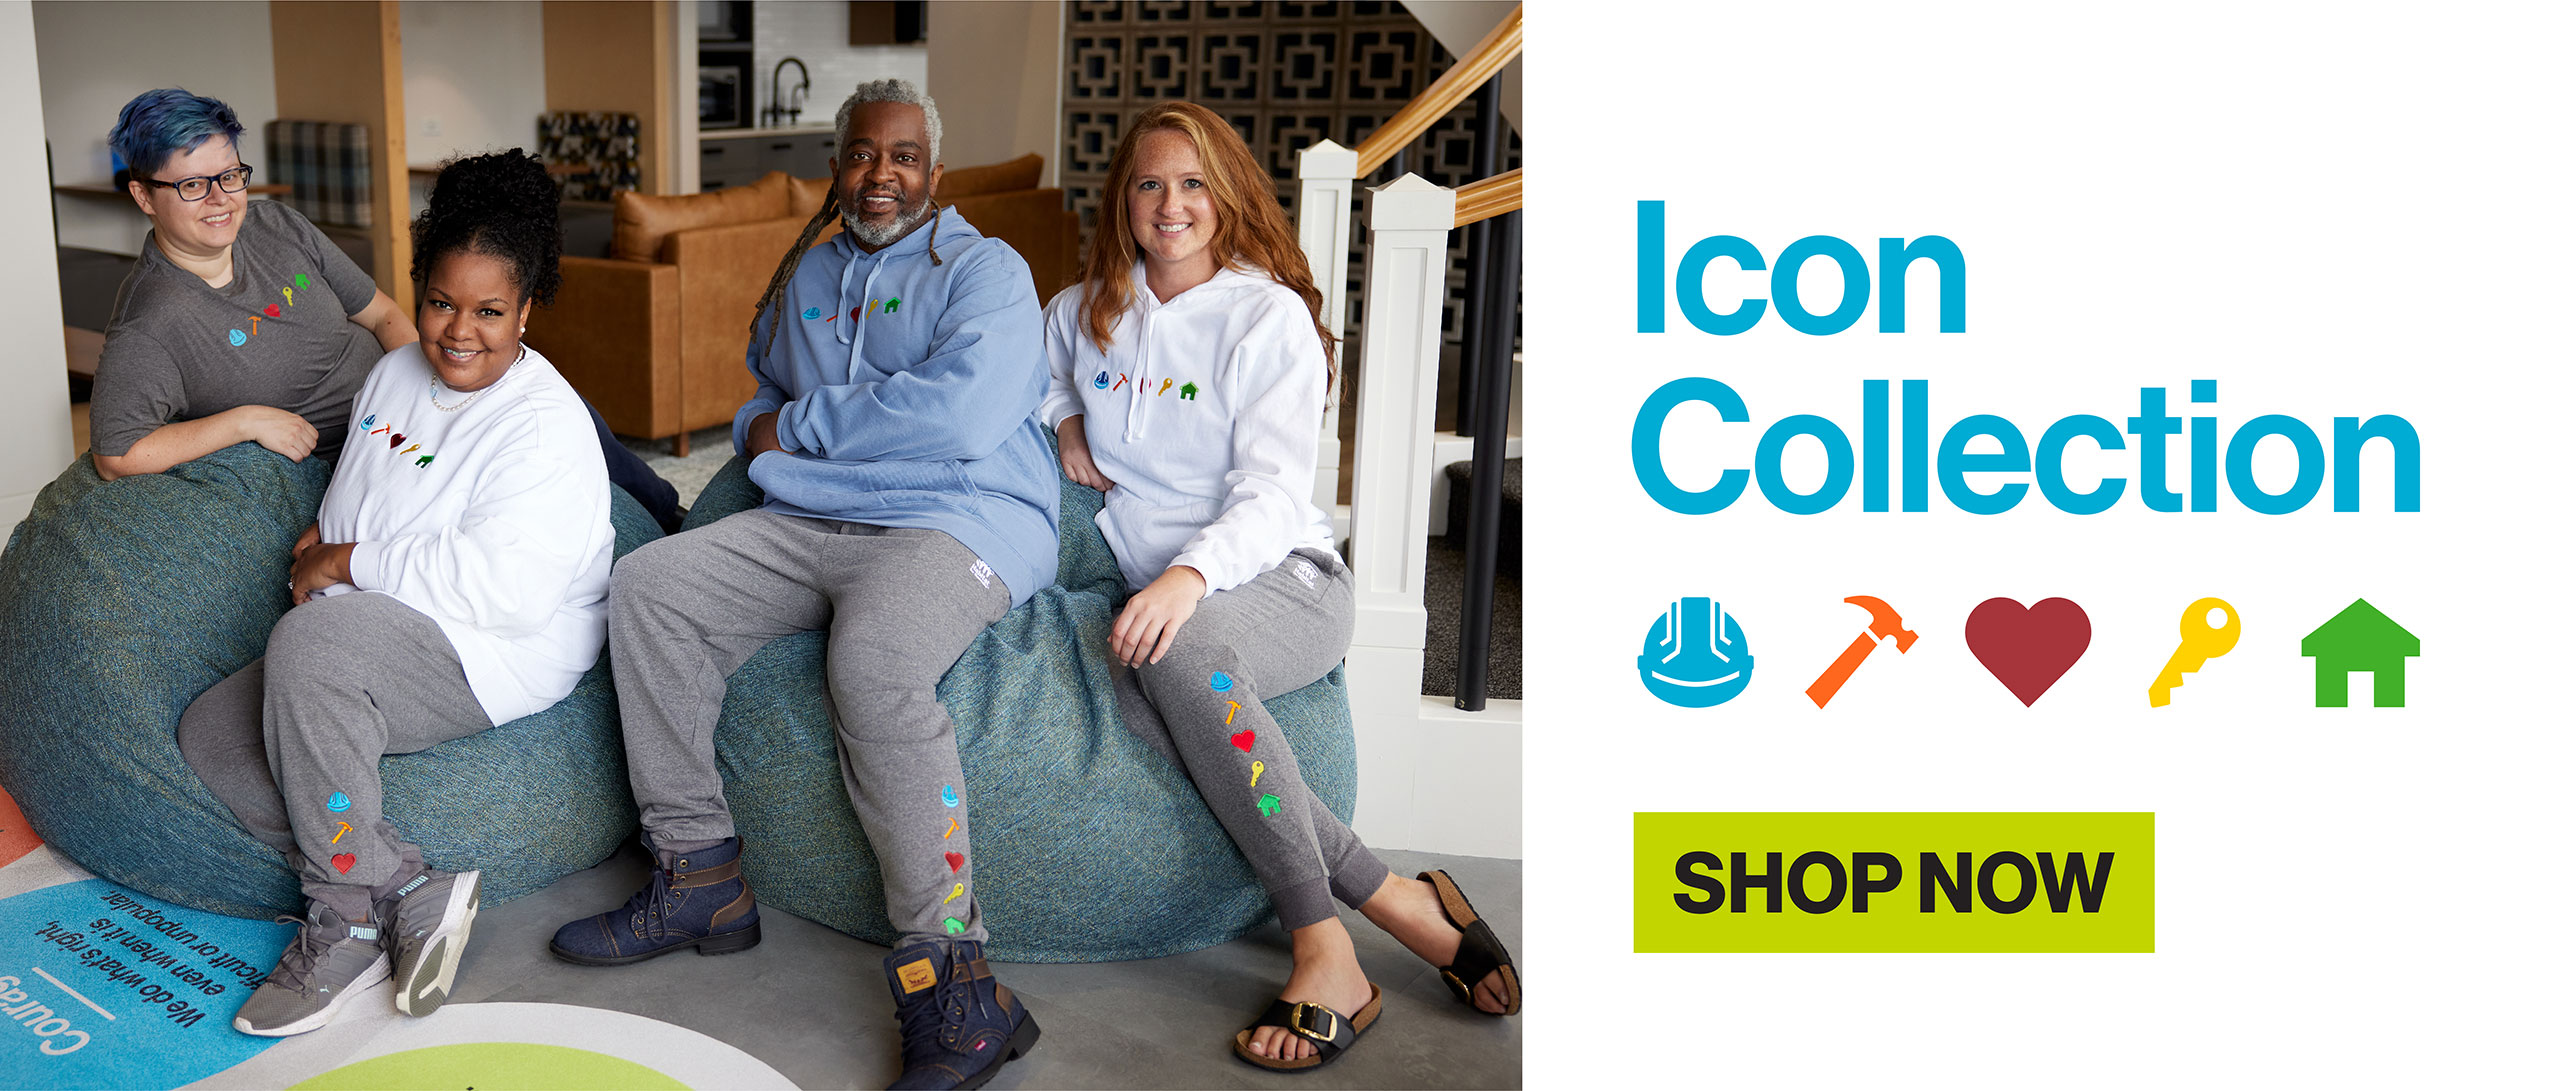 Group of people happily sitting together wearing habitat for humanity Icon collection apparel and fleece view icon collection products